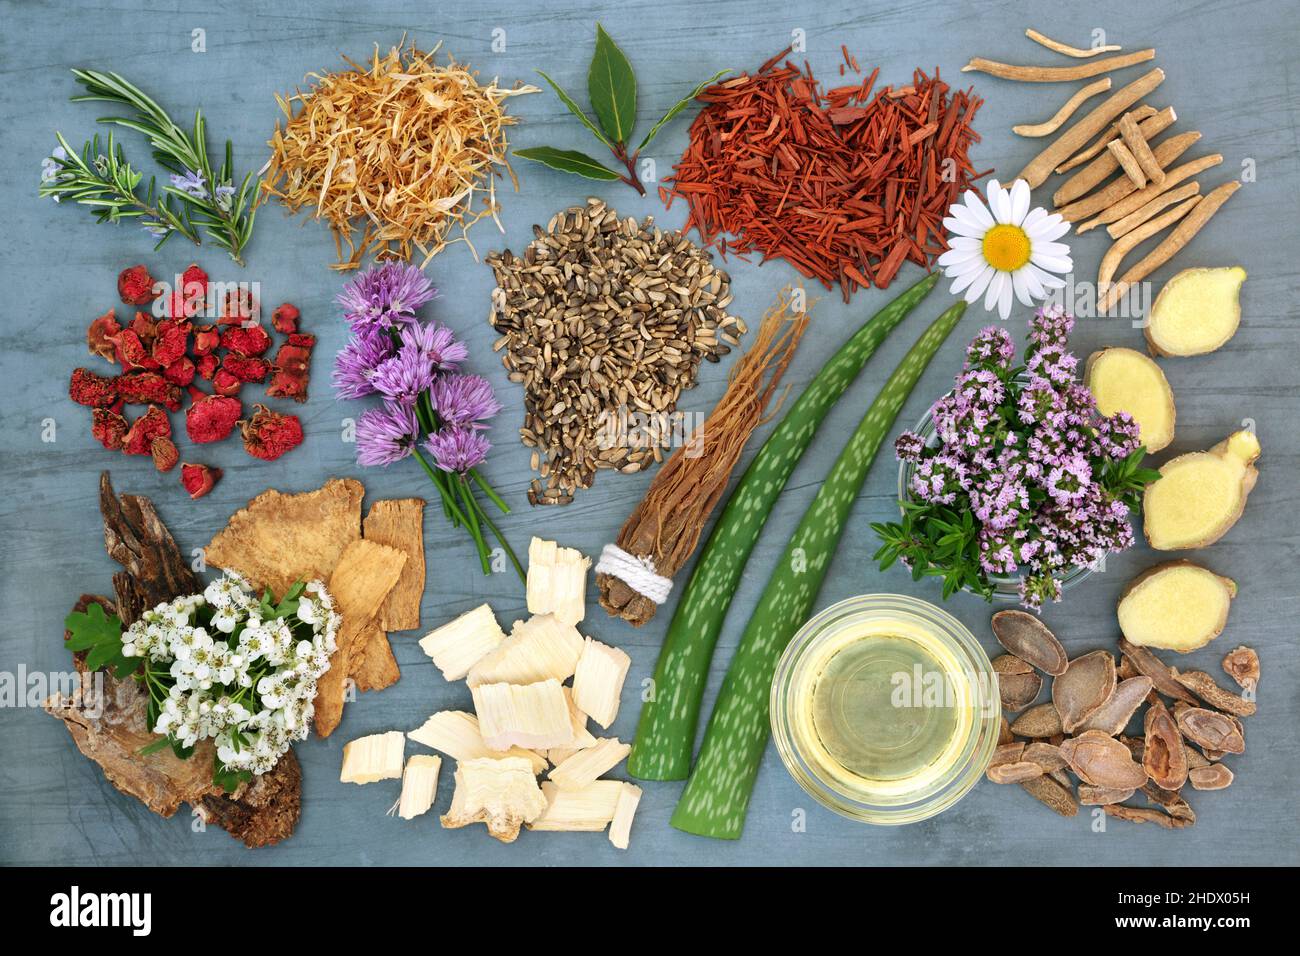 Herbal medicine with herbs and flowers in bowls and loose for natural plant medicine healing remedies. Alternative health care concept. Stock Photo